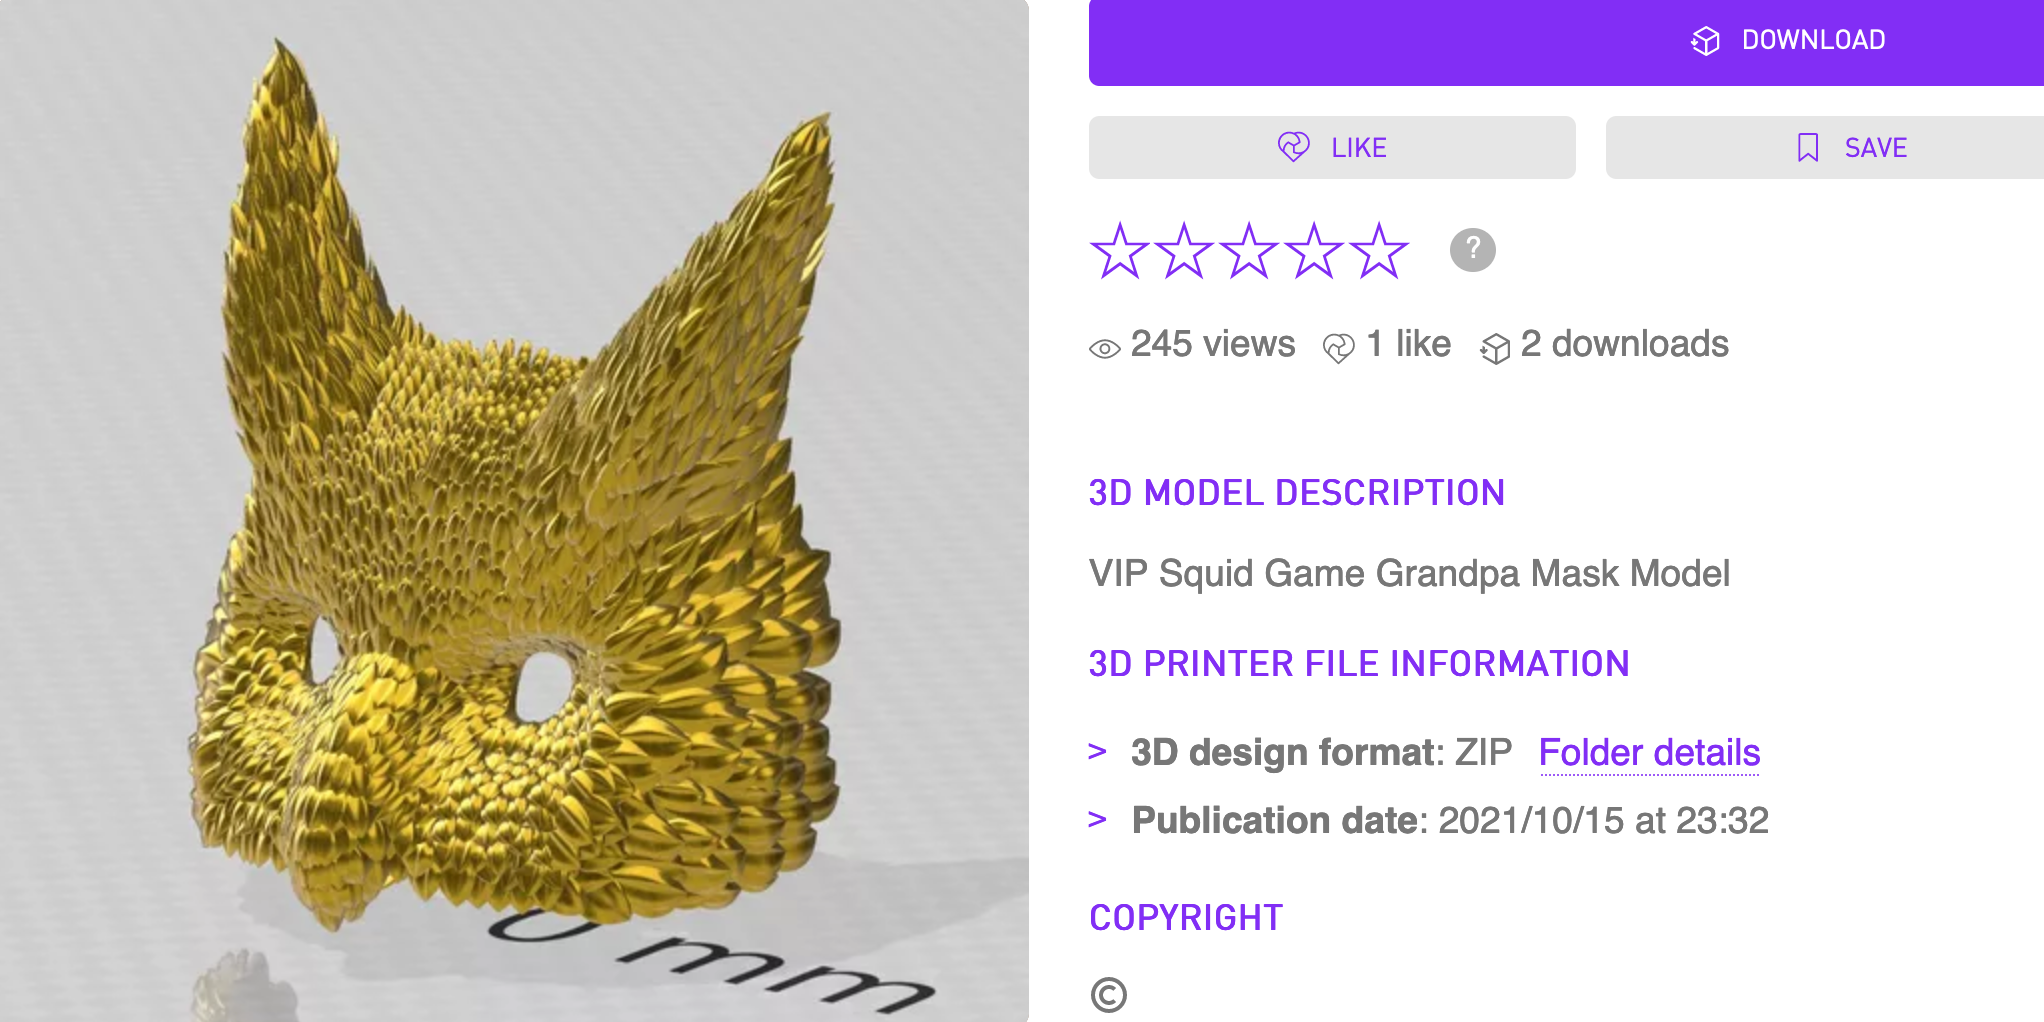 A 3D model of a golden owl mask next to information about the designer